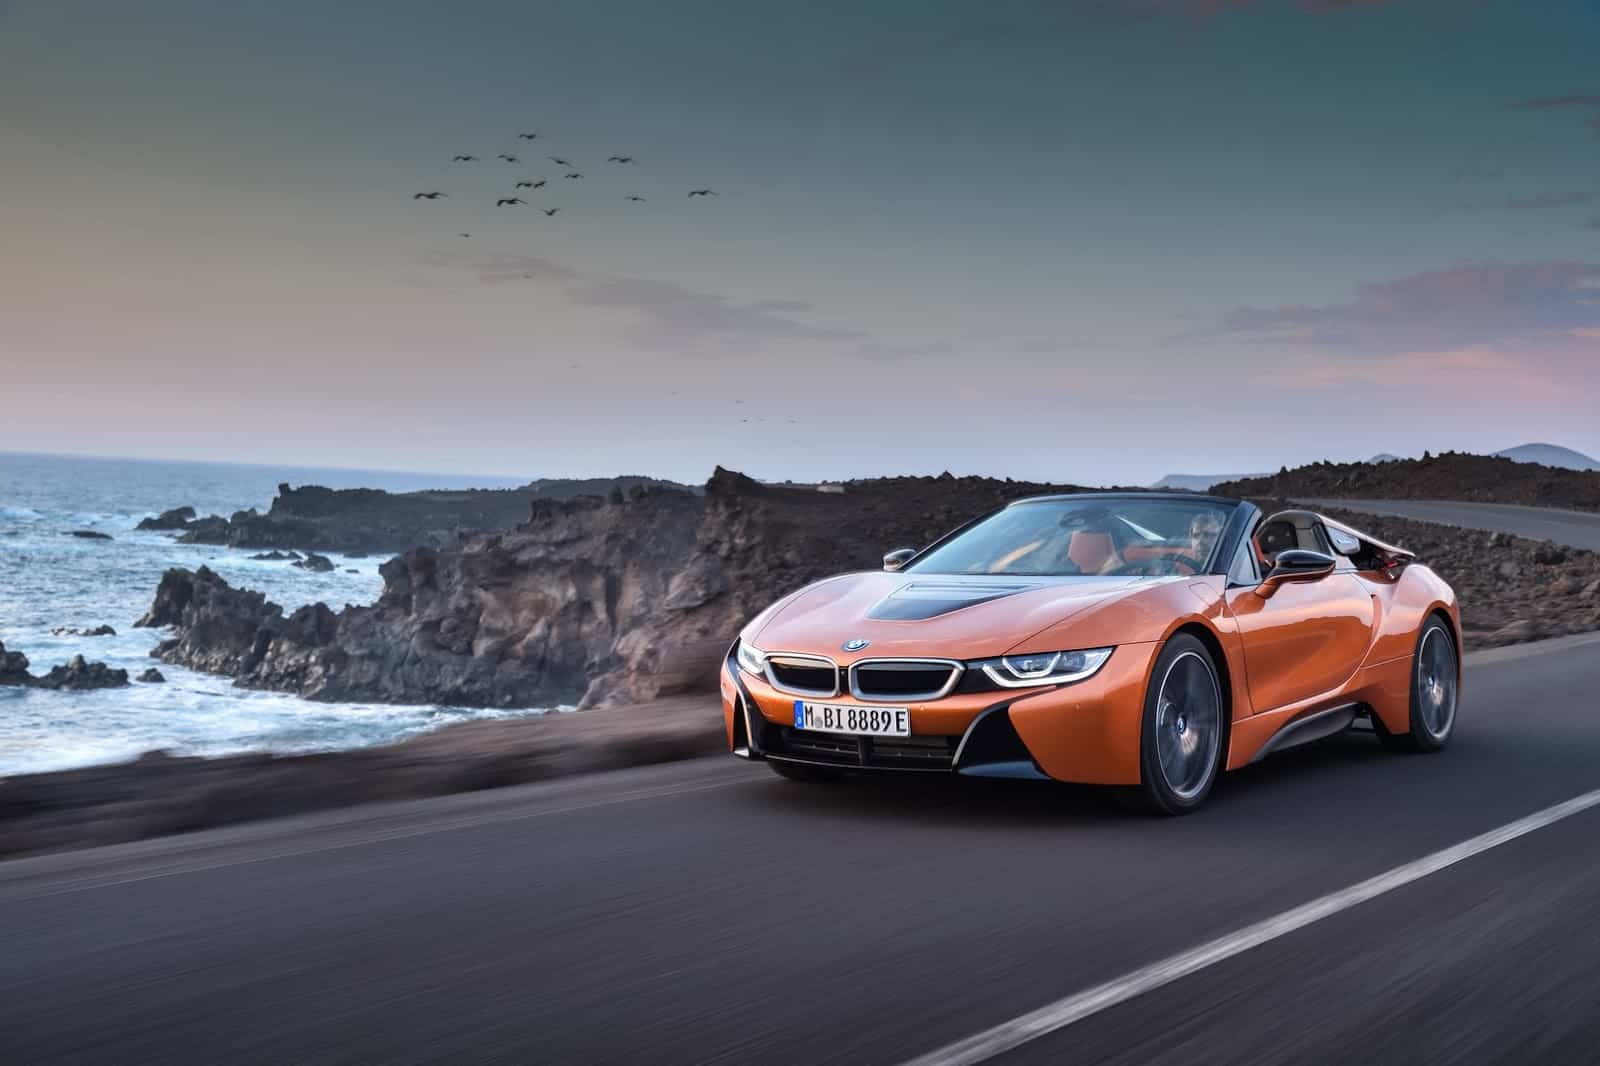 The Bmw I8 Roadster Is A Dream E True For Some Of Us